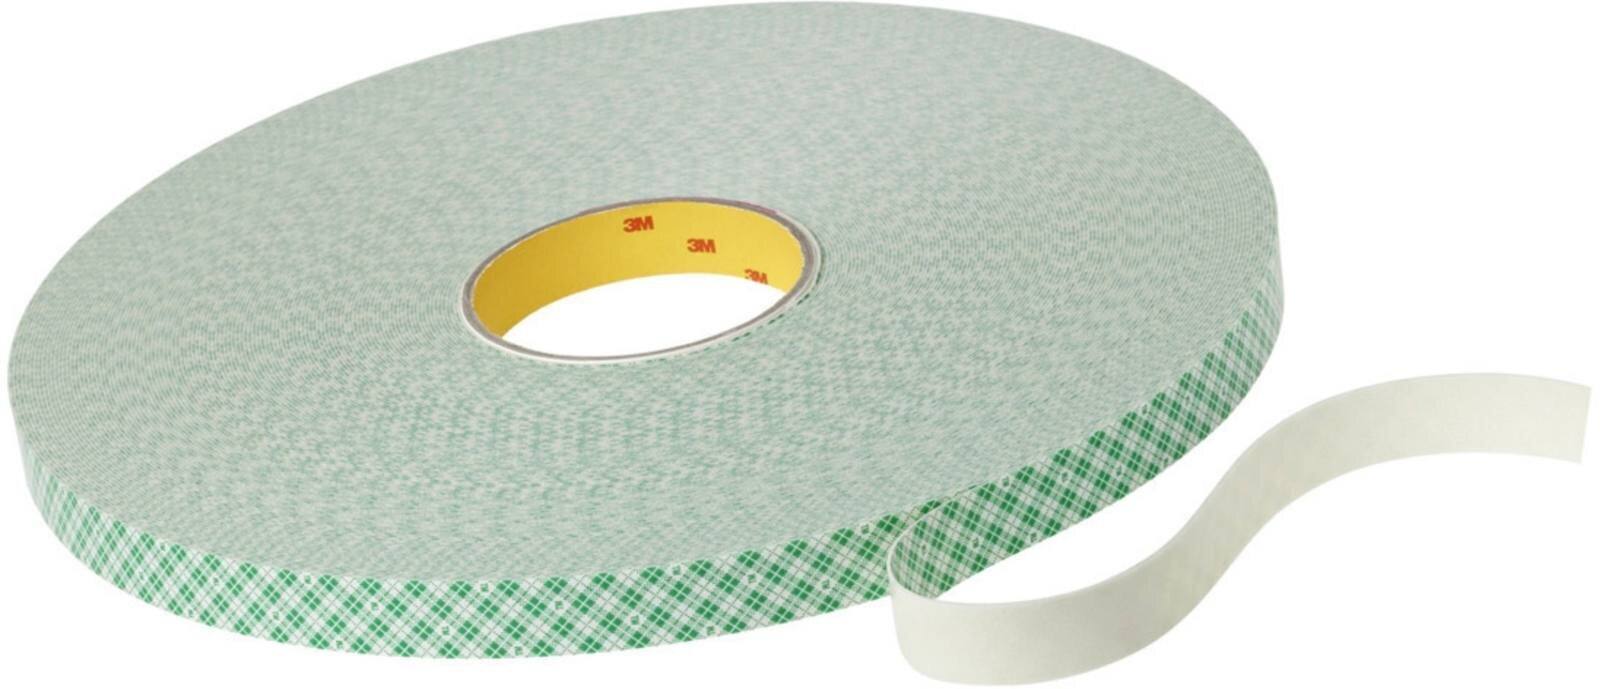 3M PU foam adhesive tape with acrylic adhesive 4032, beige, 19 mm x 66 m, 0.8 mm